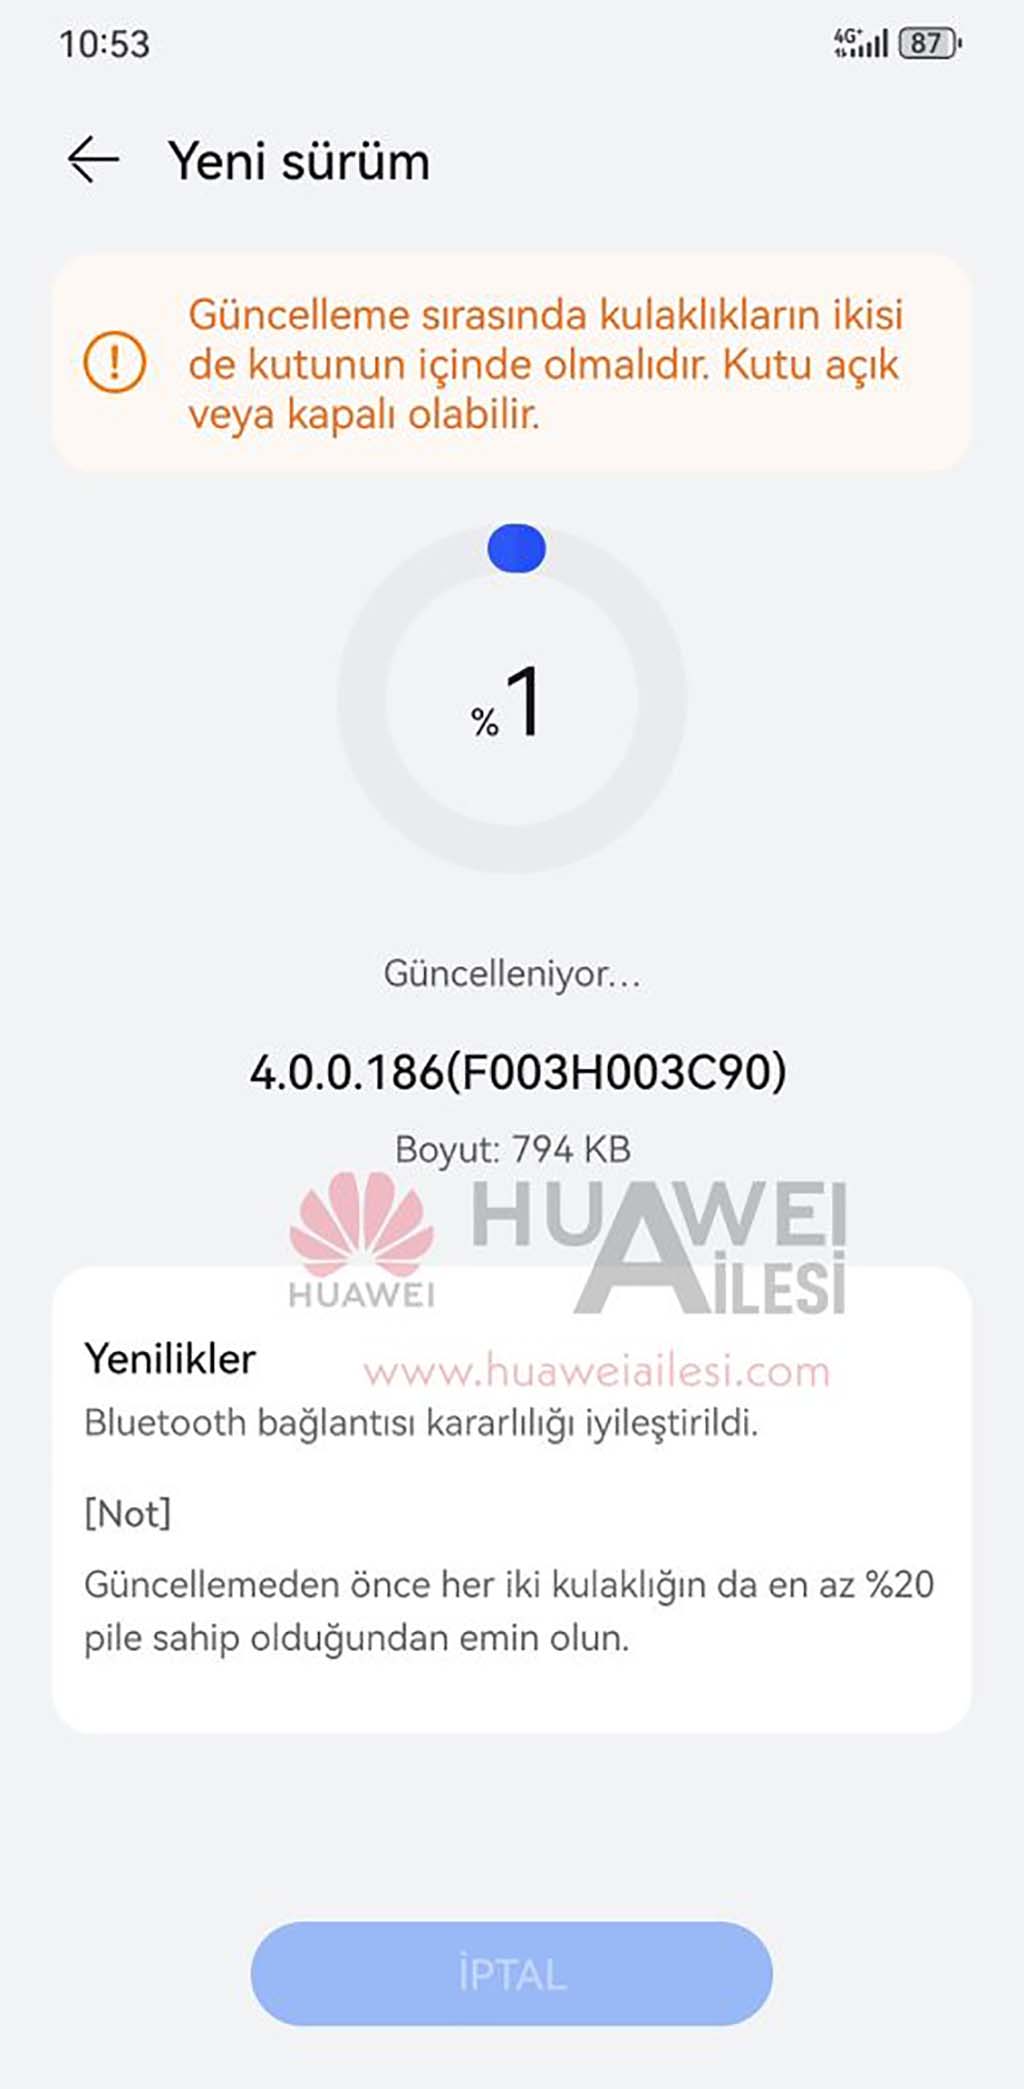 New optimizations and improvements released for Huawei FreeBuds Pro via new  update - Huawei Central